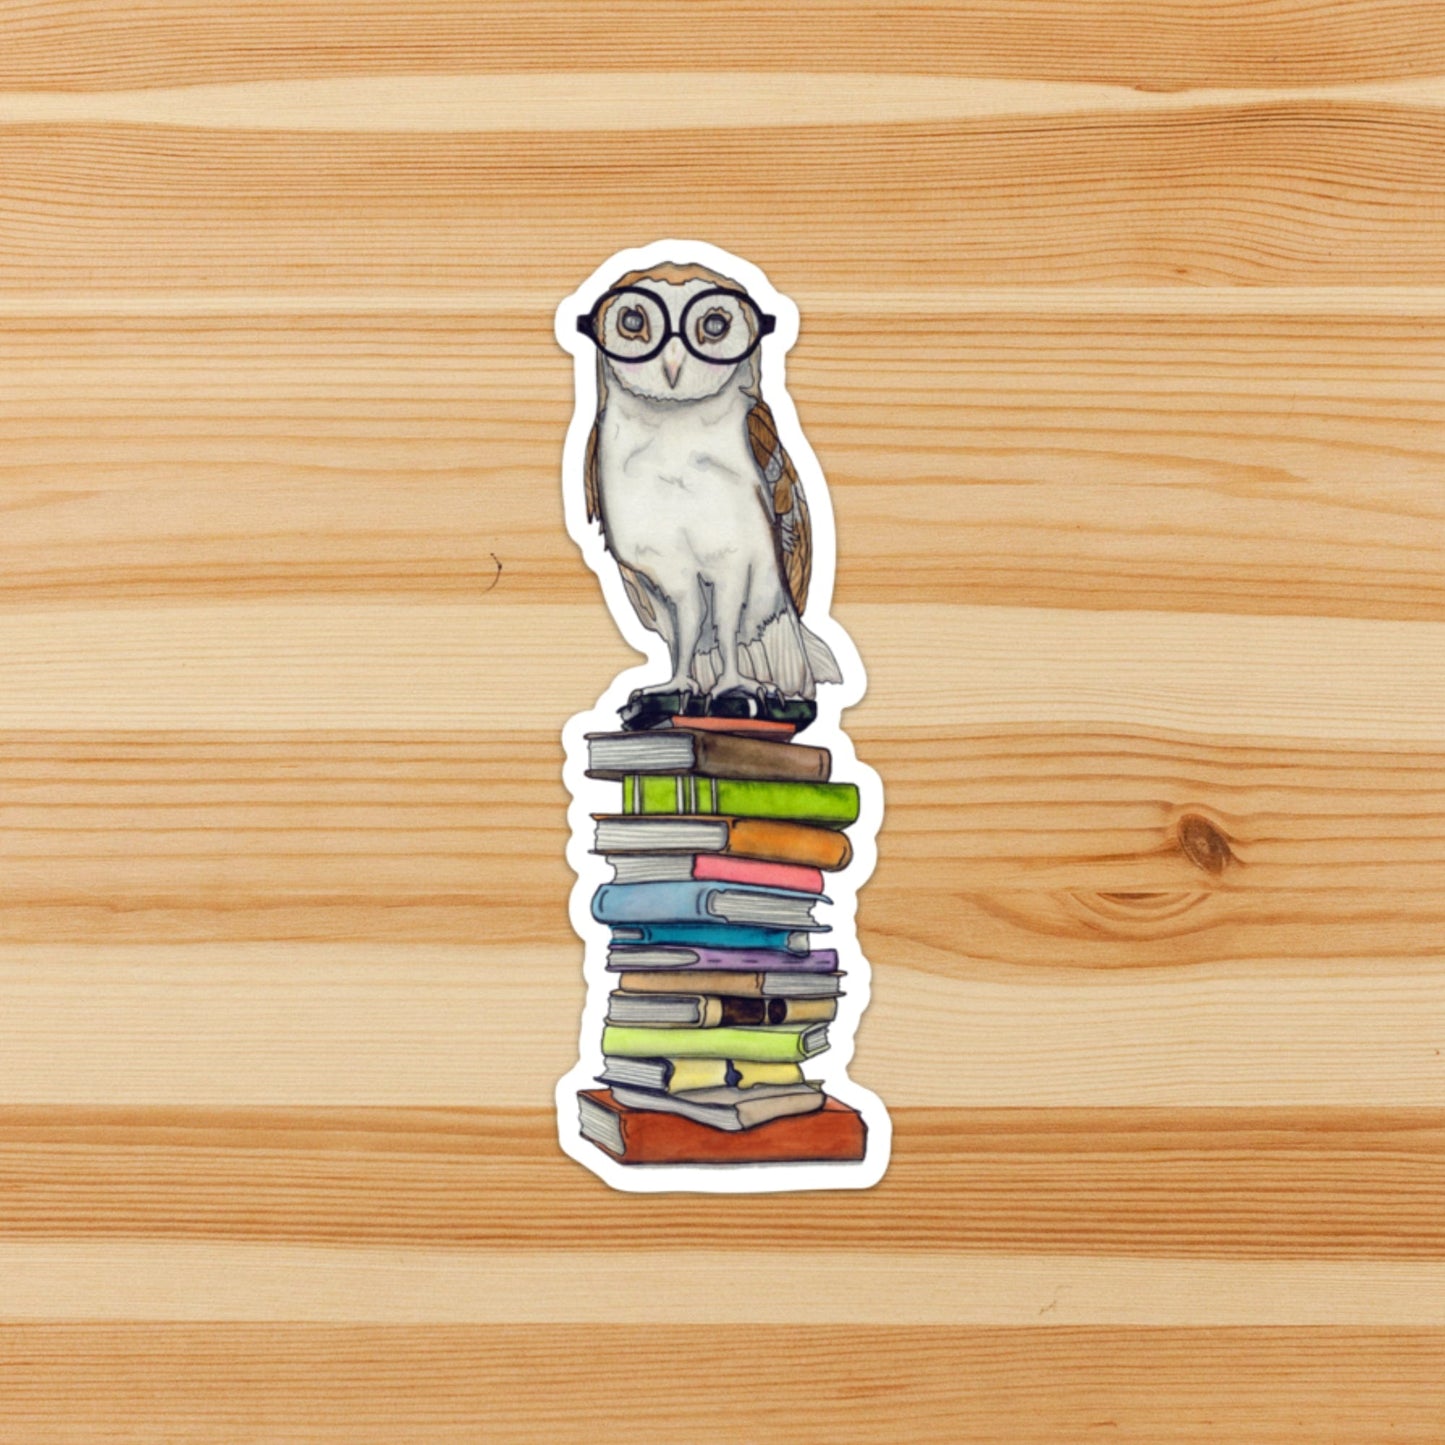 PinkPolish Design Giant Stickers "Book-Learned Owl'  Giant Vinyl Die Cut Sticker